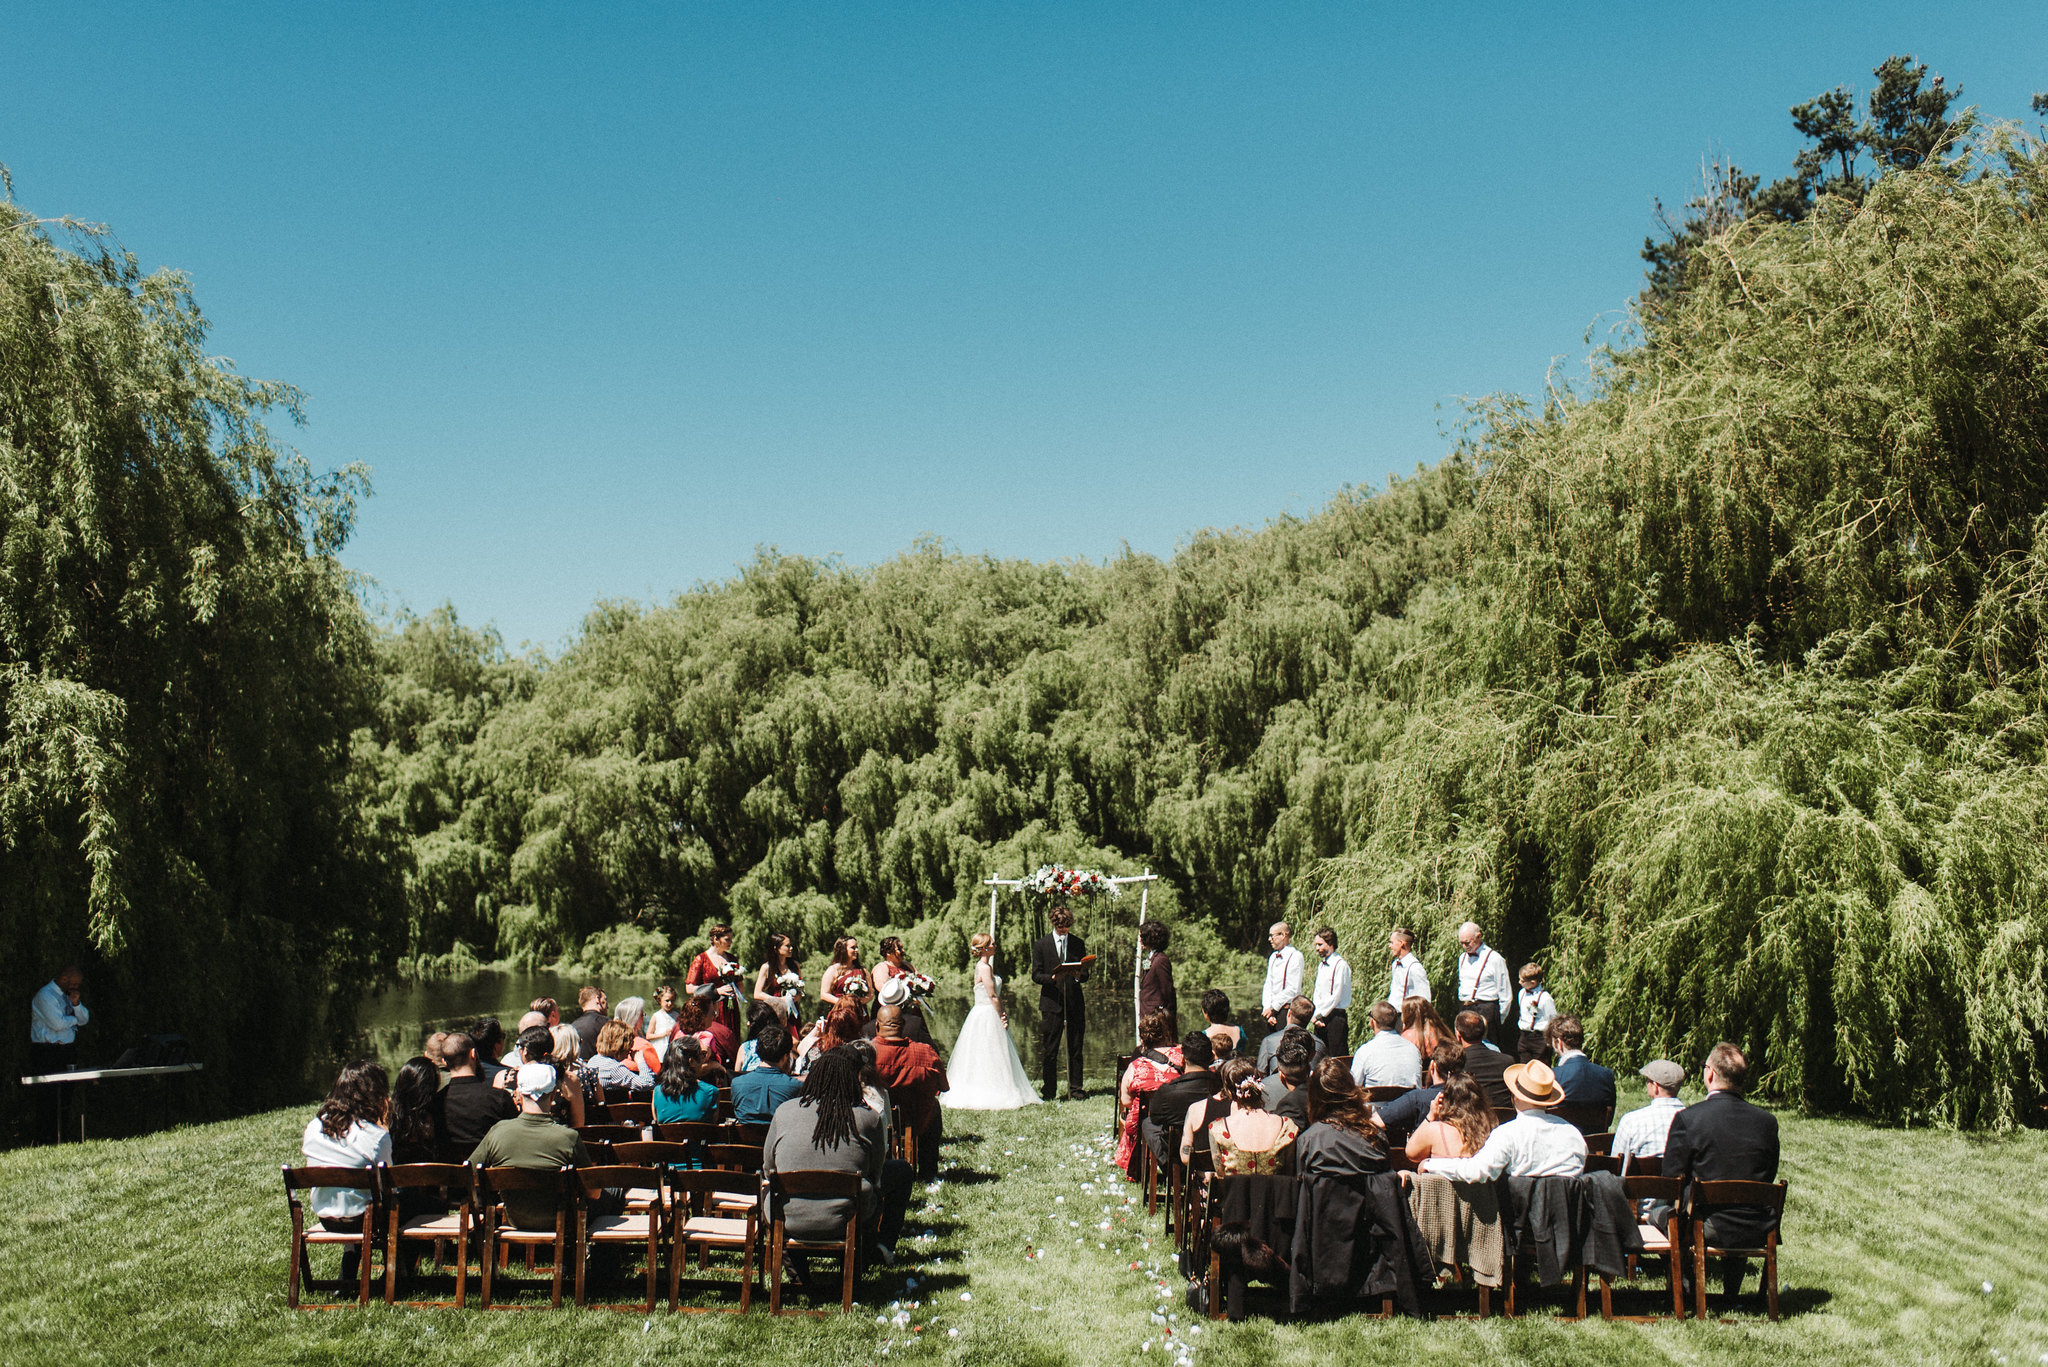 A wedding ceremony takes place on a sunny cloudless day. Small shindigs